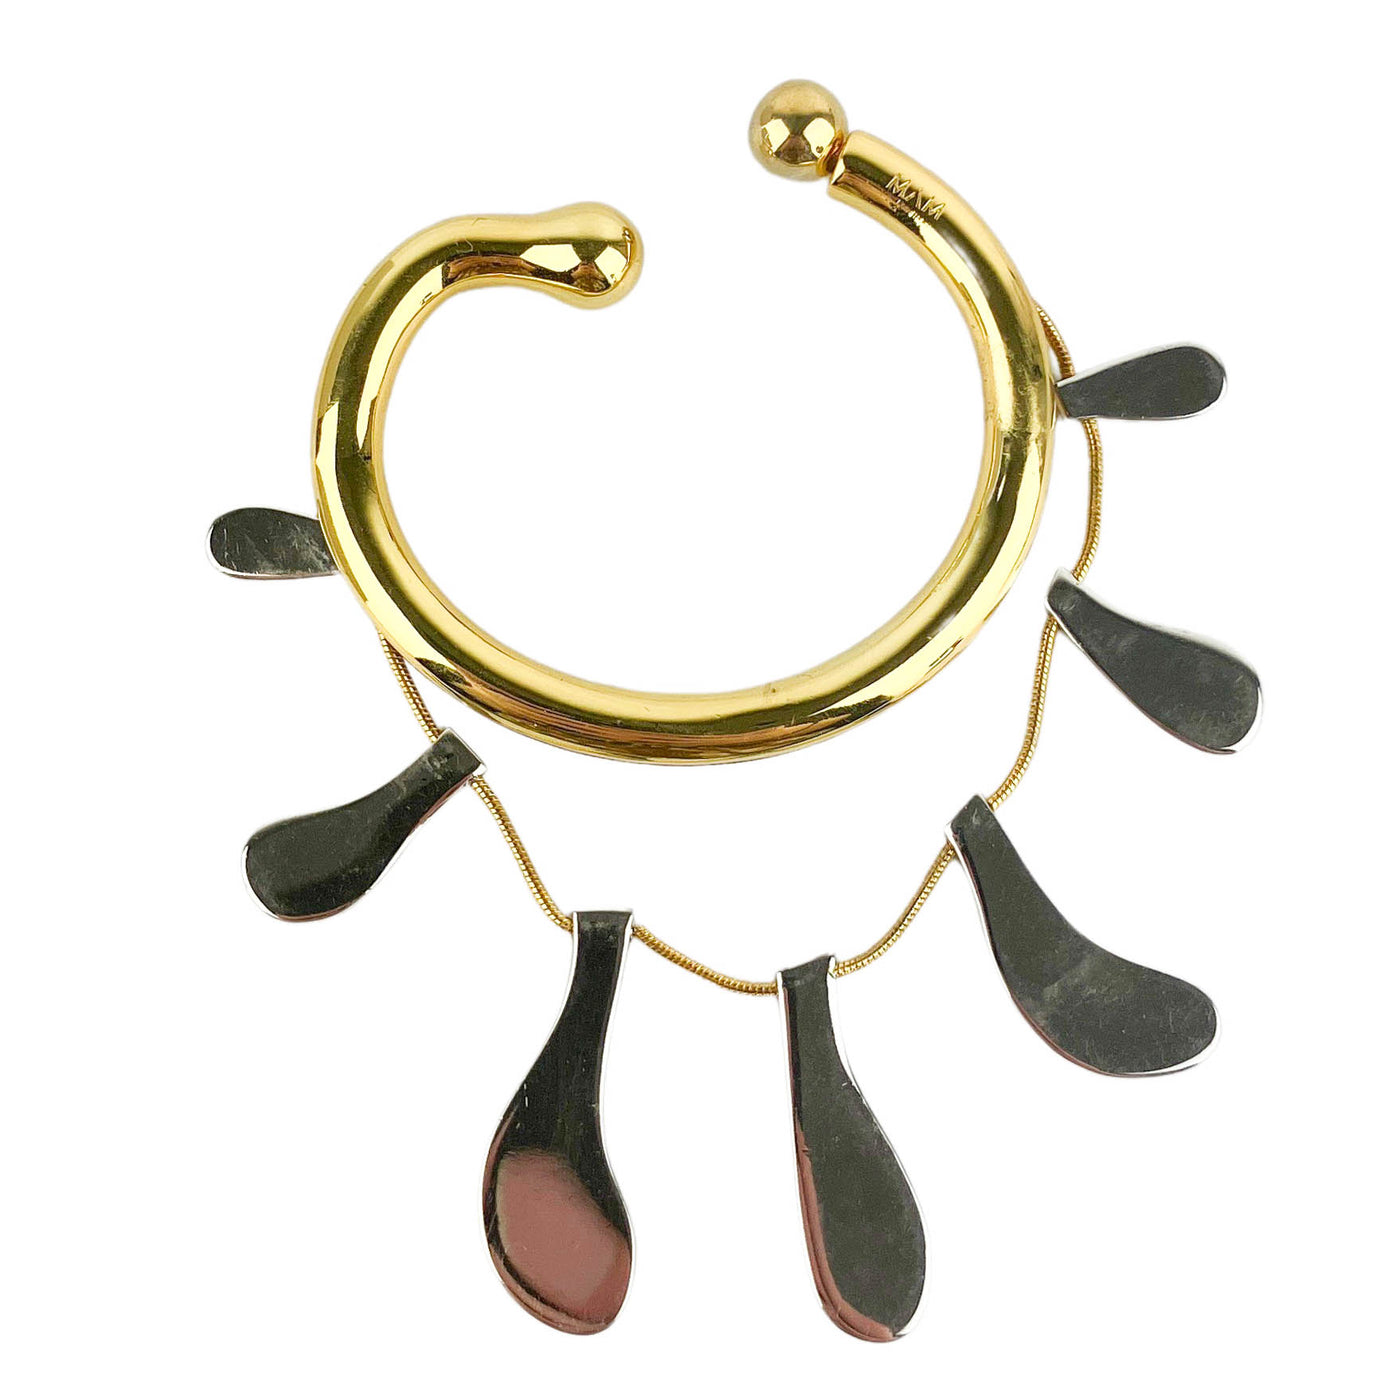 Exclusive Designer Blossom Ear Cuff in Gold & Silver - Discounts on Exclusive Designer at UAL